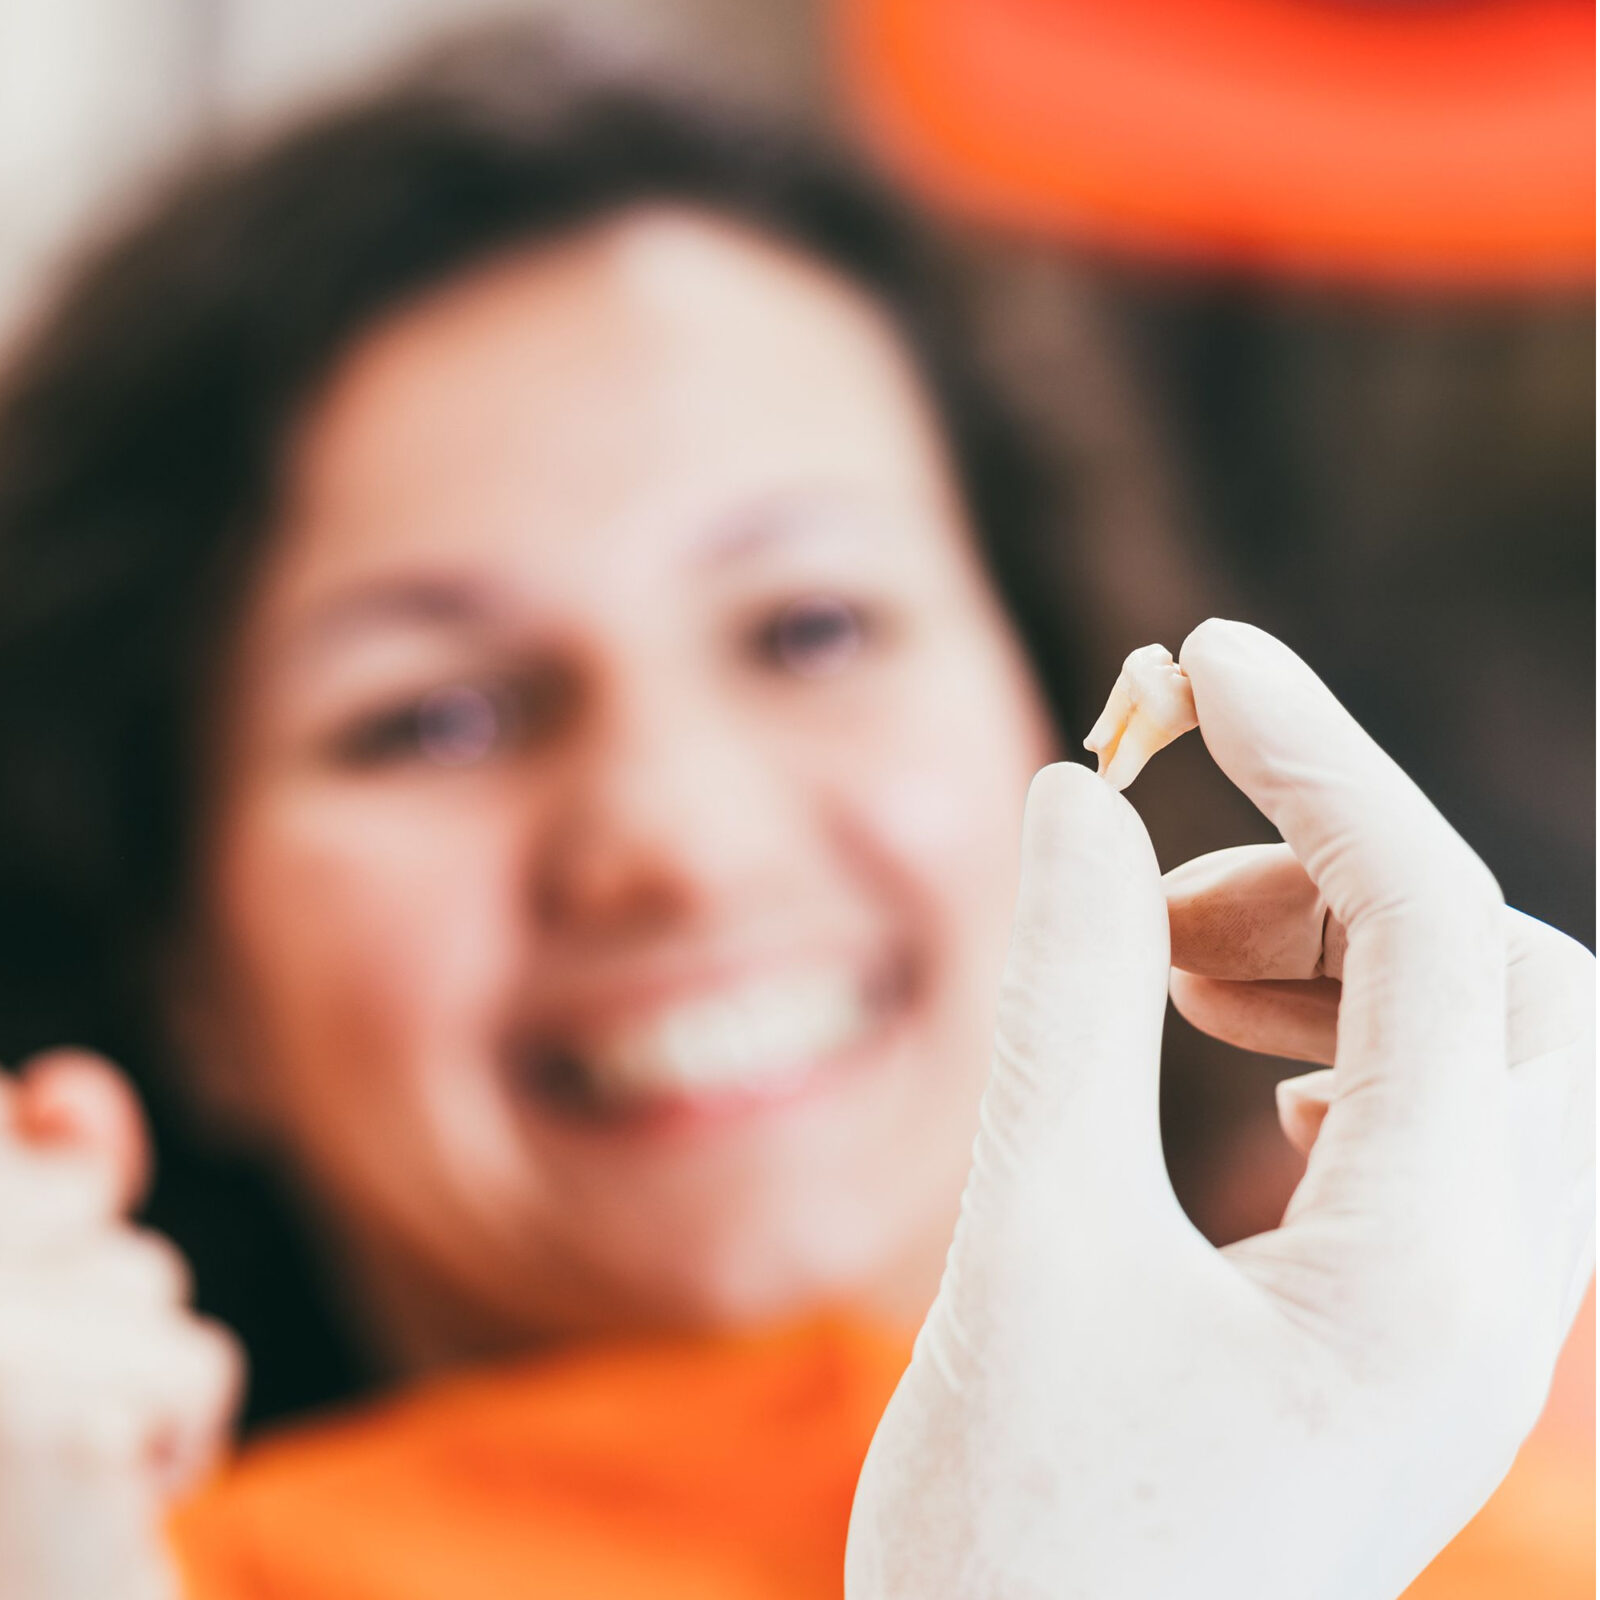 A woman smiling after Oral Surgery, Teeth Extraction